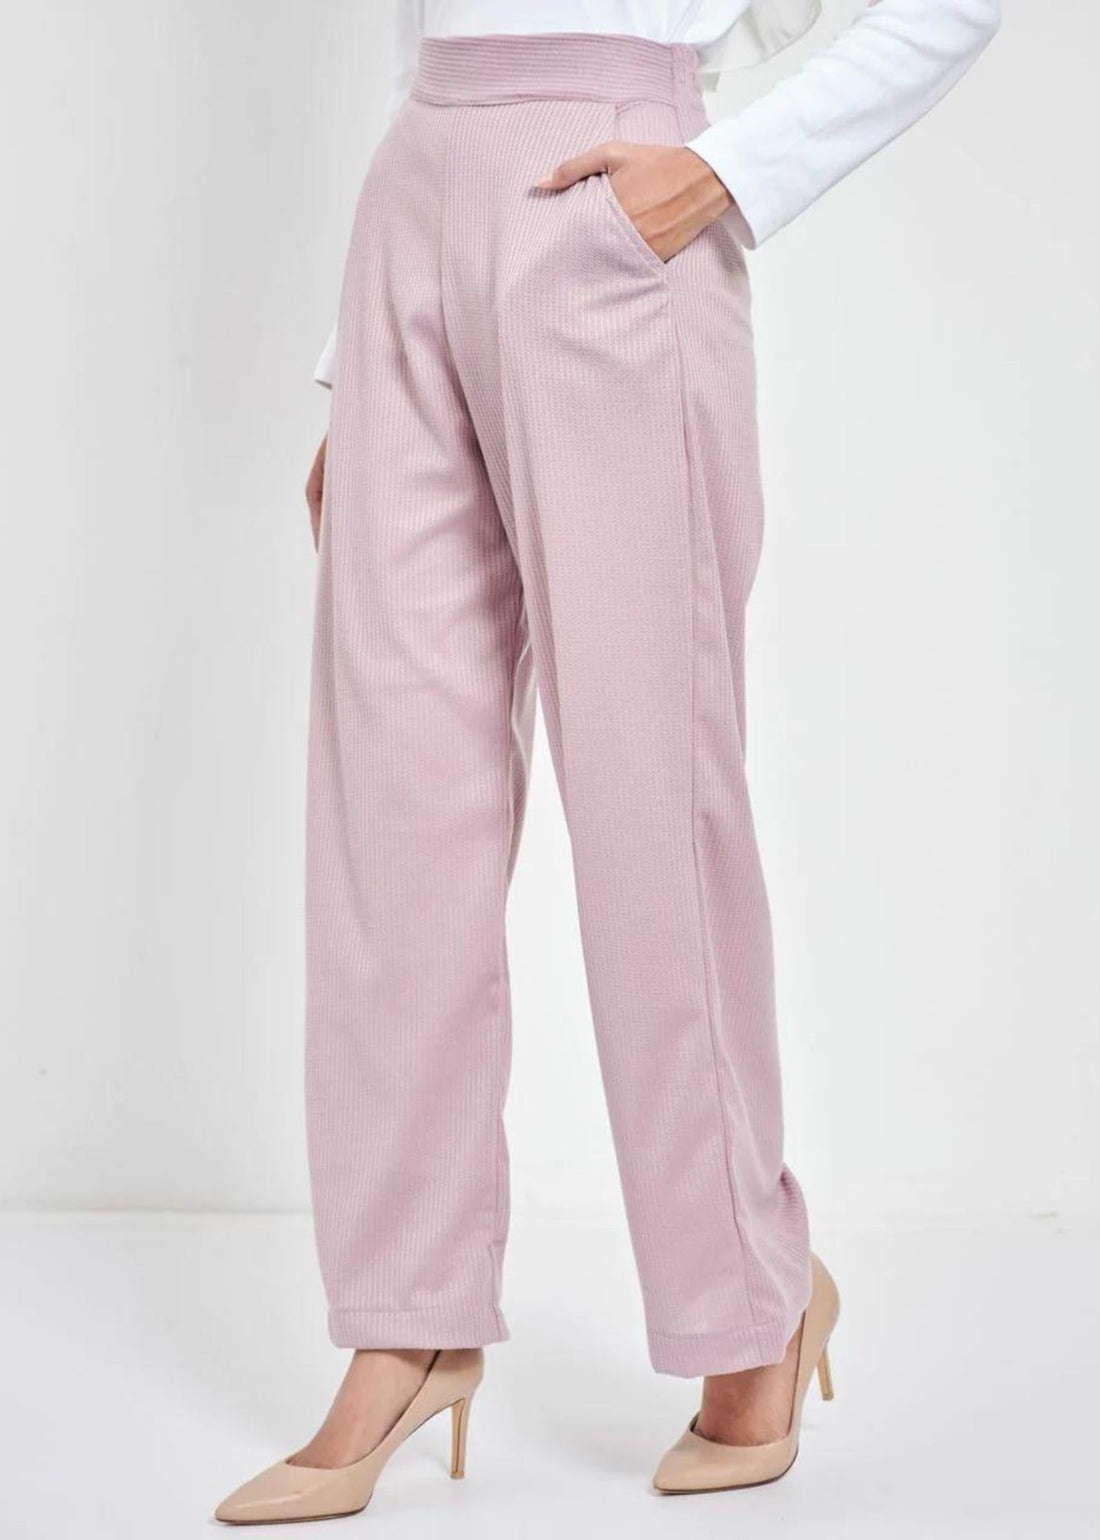 DONNA Straight Cut Pants in Periwinkle